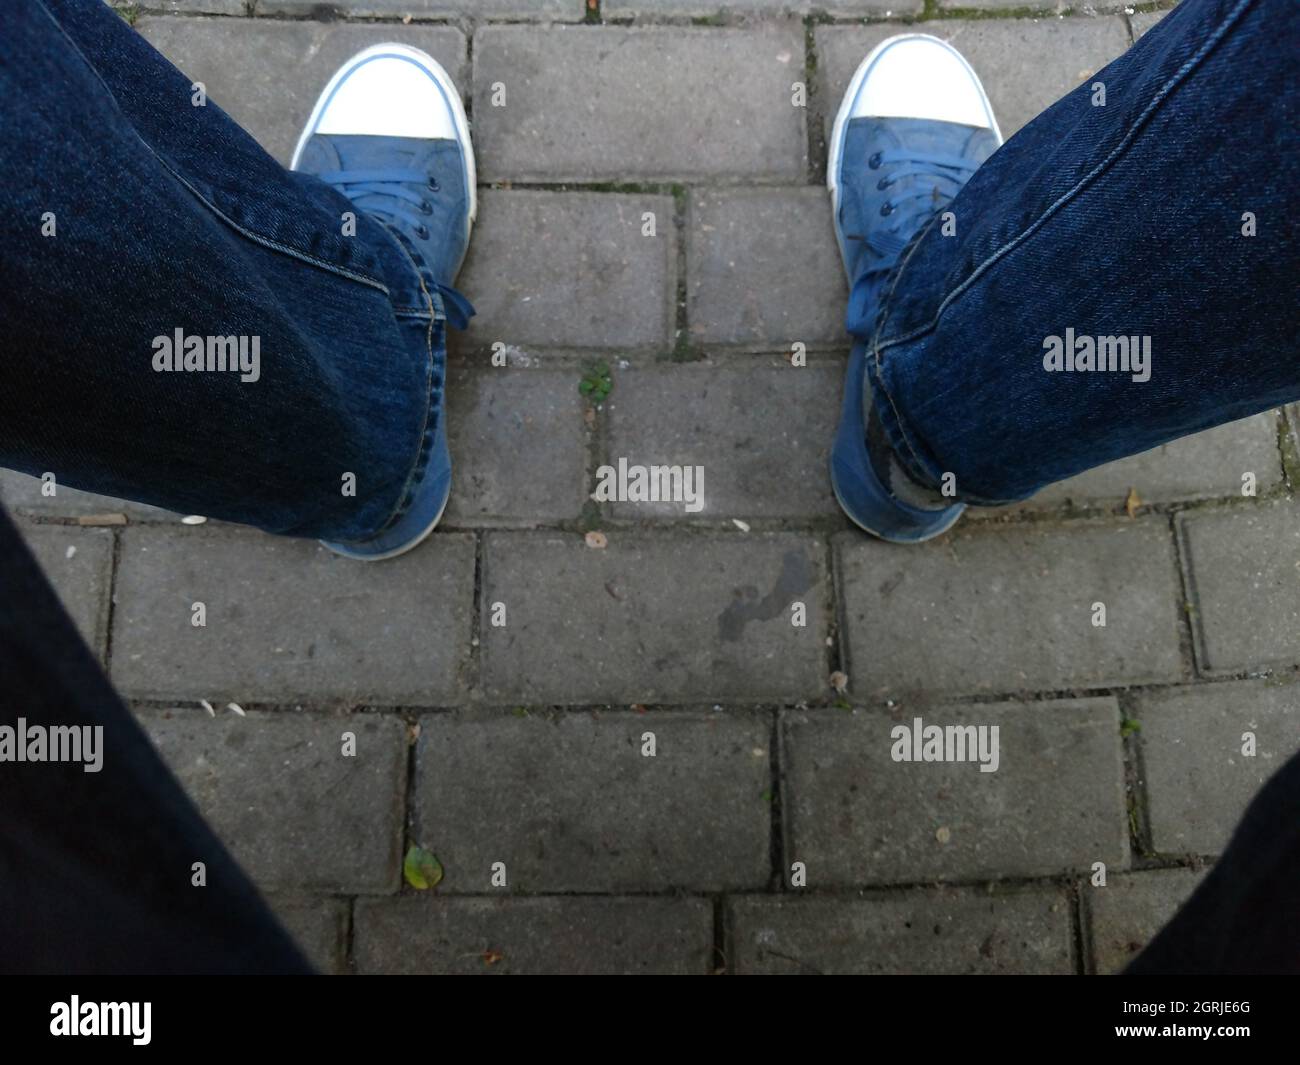 Low Section Of Man Wearing Shoes While Standing On Pavement Stock Photo